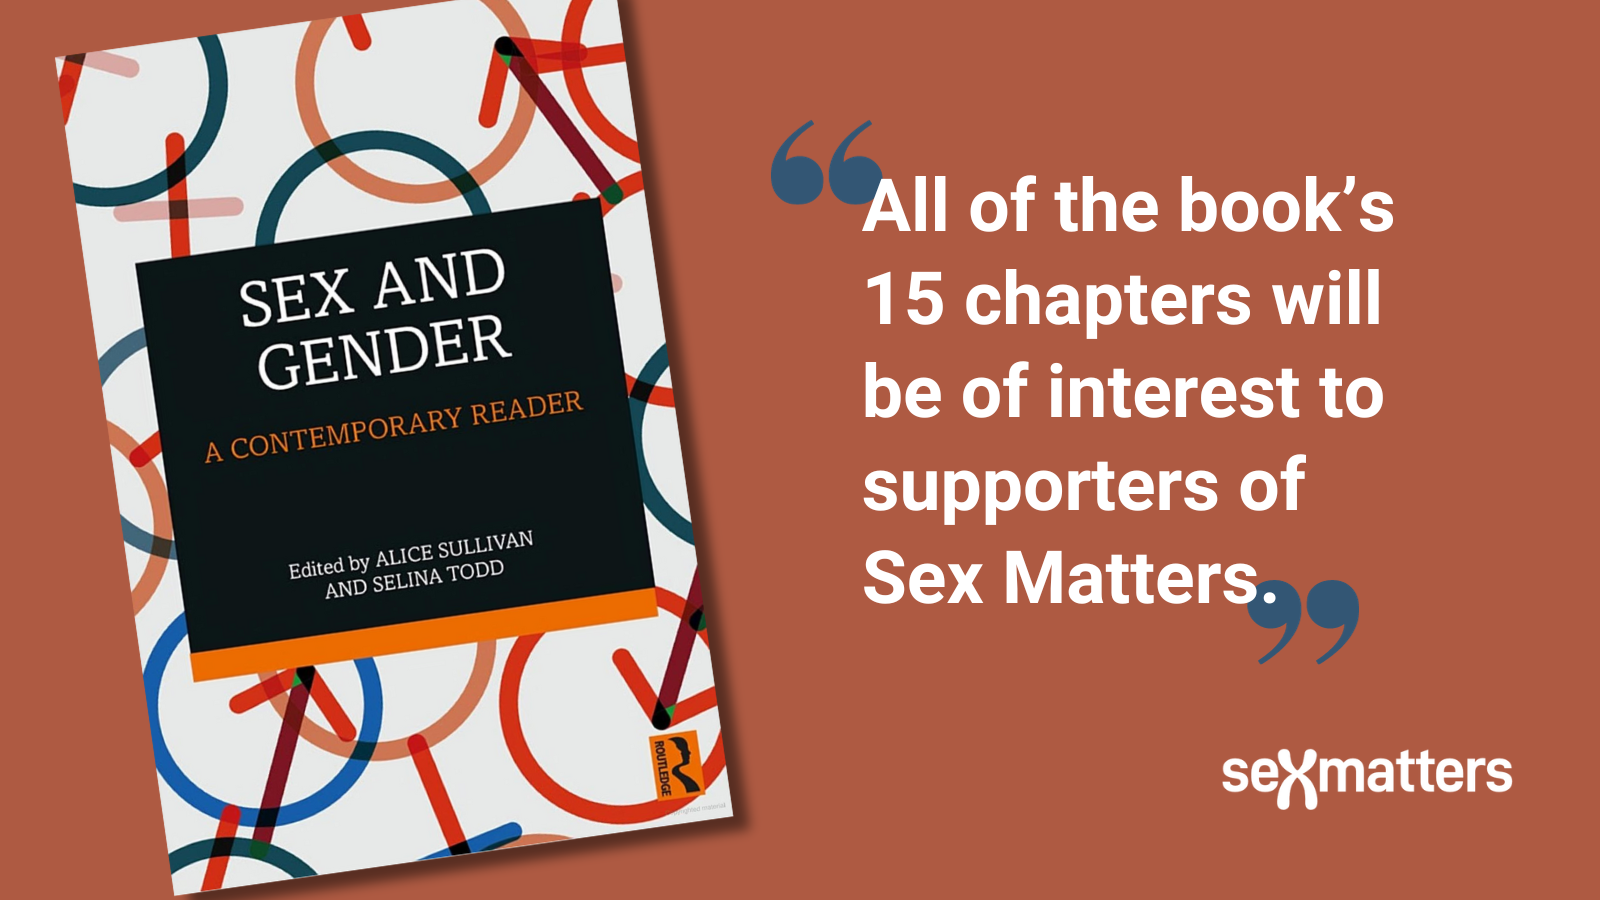 All of the book’s 15 chapters will be of interest to supporters of Sex Matters.